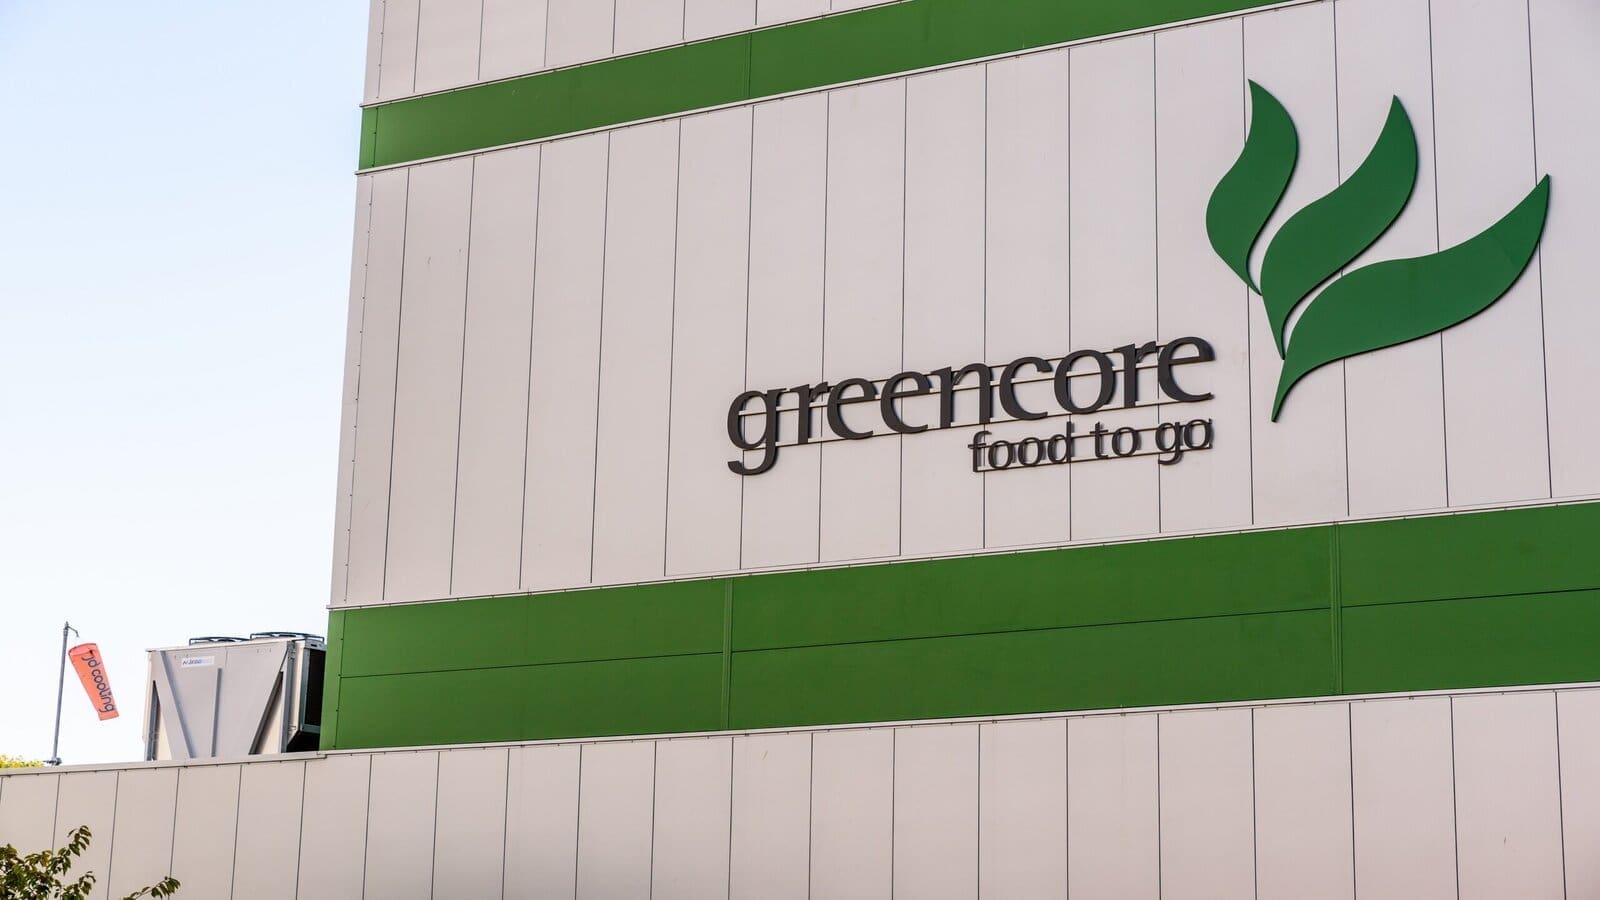 Greencore to sell its vegetable oils business Trilby to K.T.C. Limited